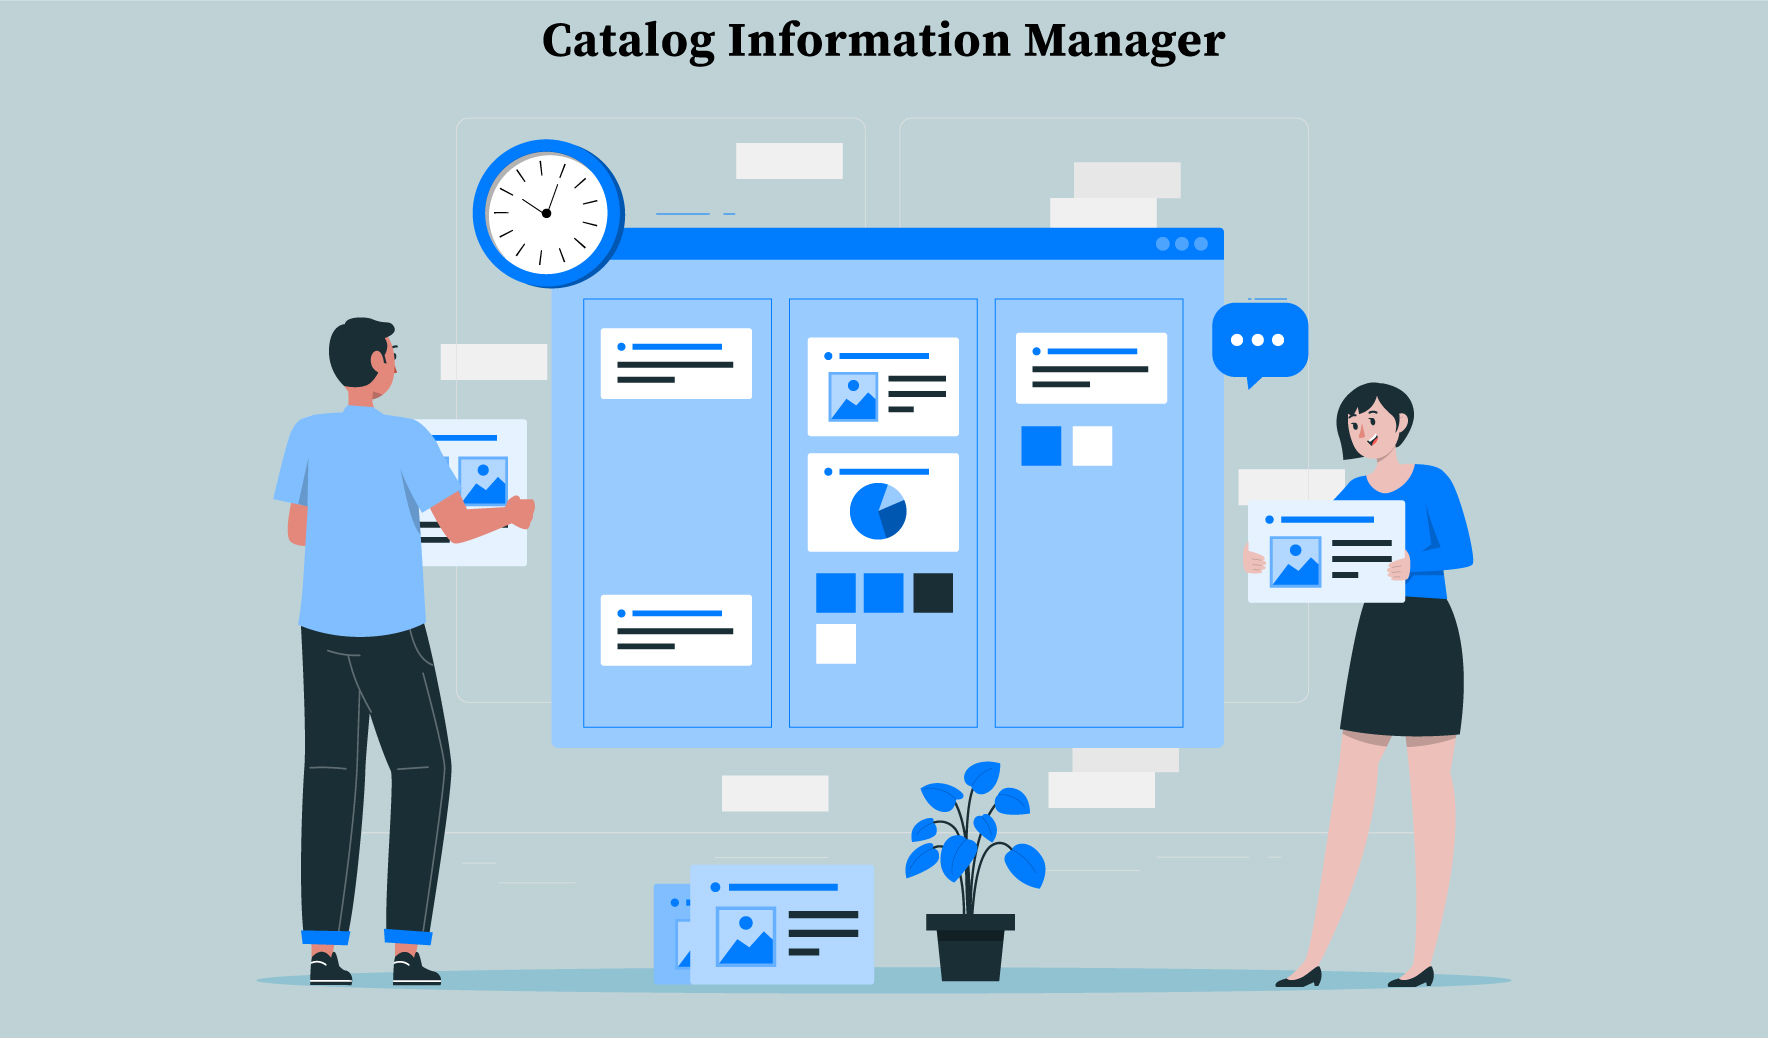 What is catalog information manager